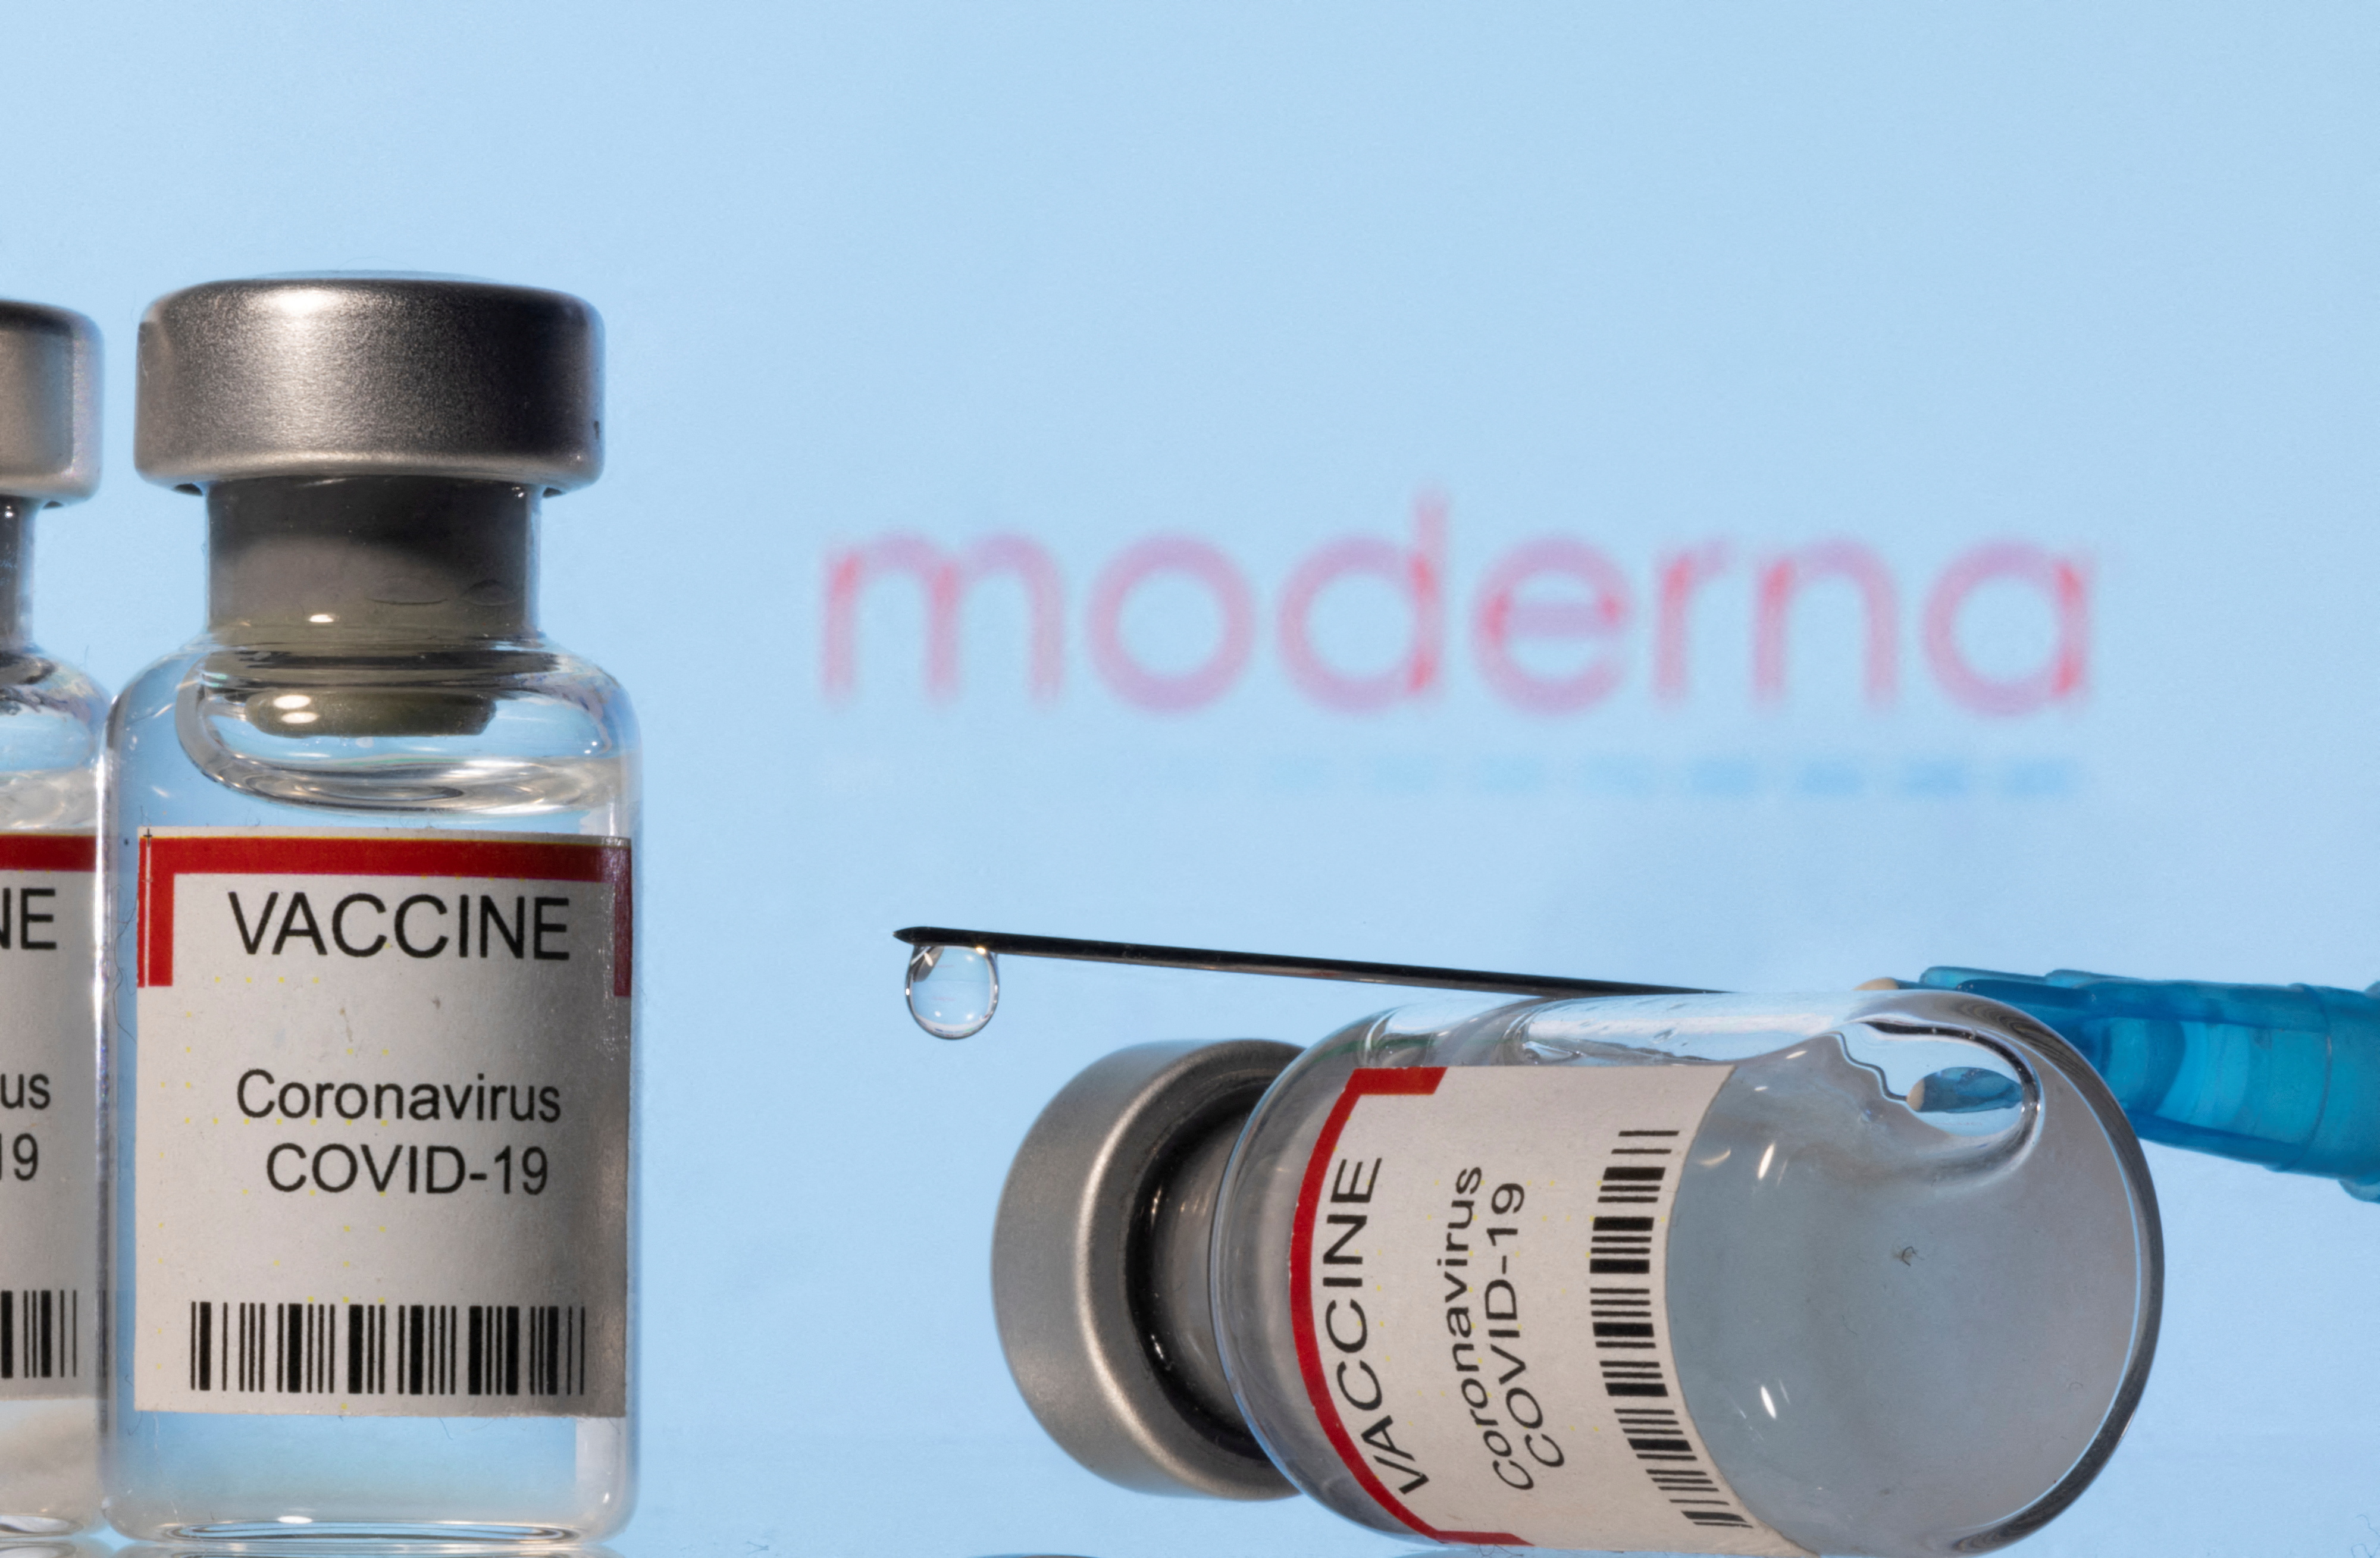 Illustration shows vials labelled VACCINE Coronavirus COVID-19 and a syringe in front of a displayed Moderna logo